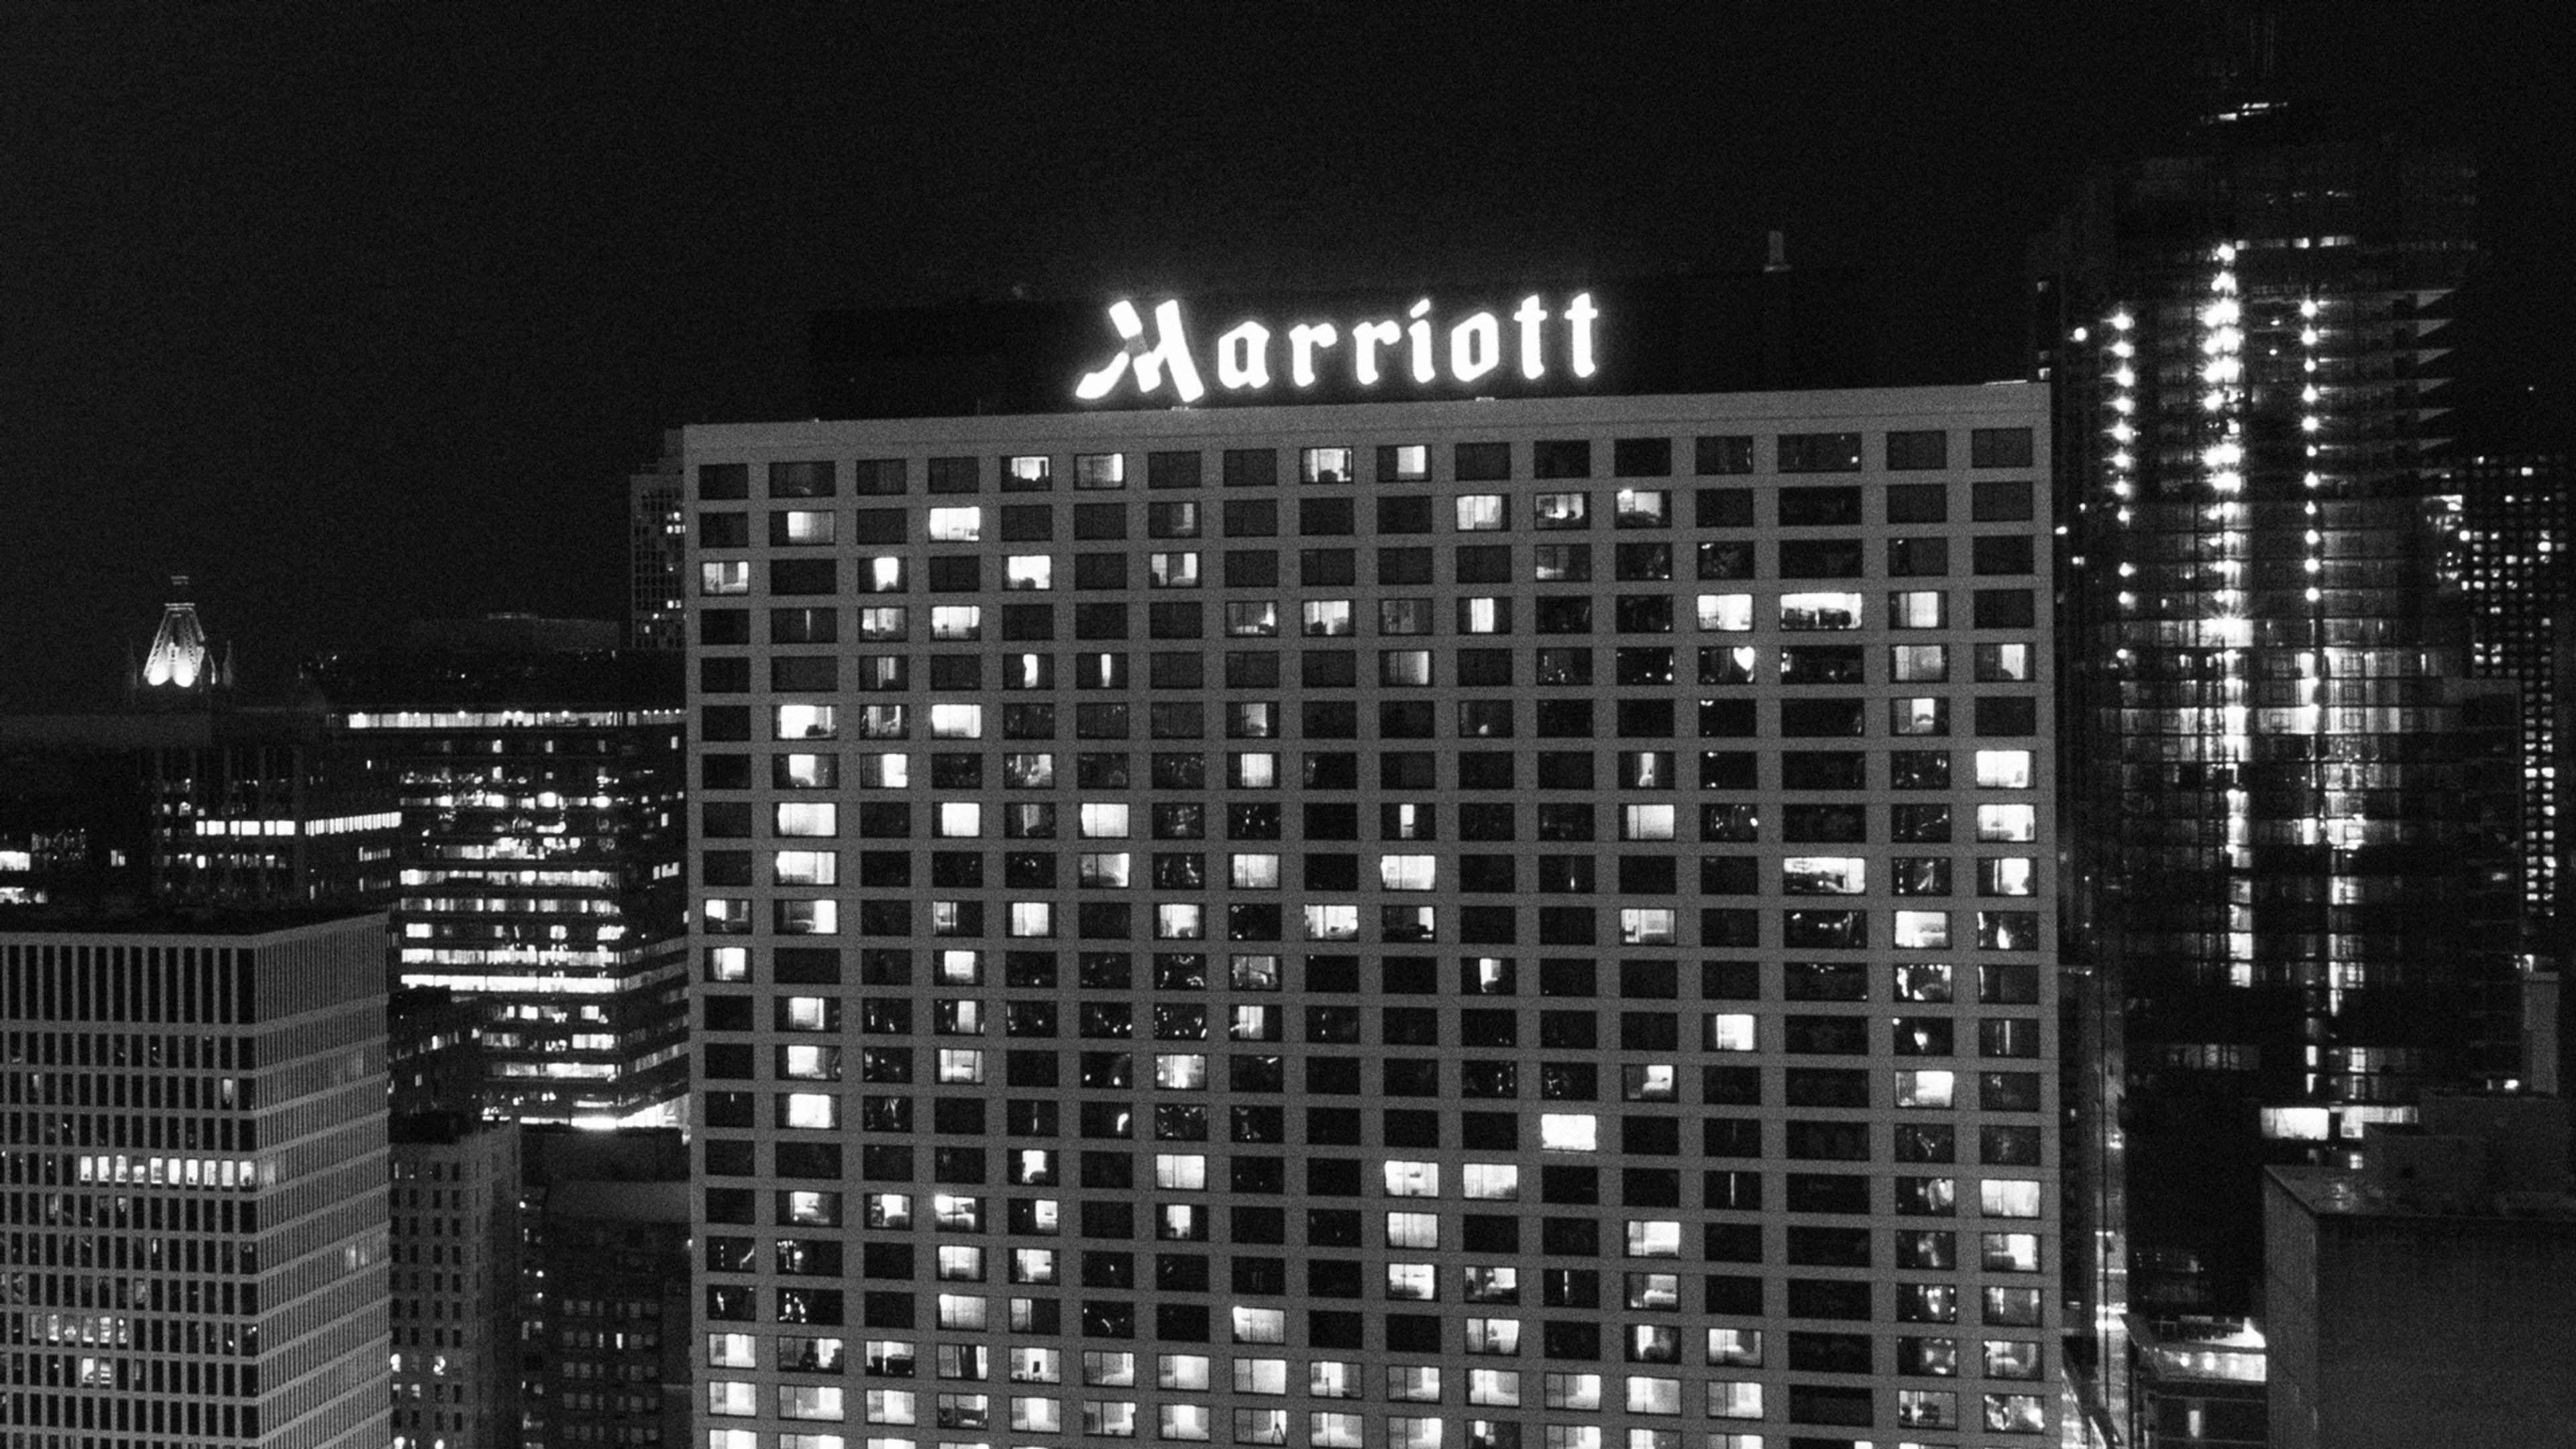 China was reportedly behind the Marriott hack, as well as other hacks, too